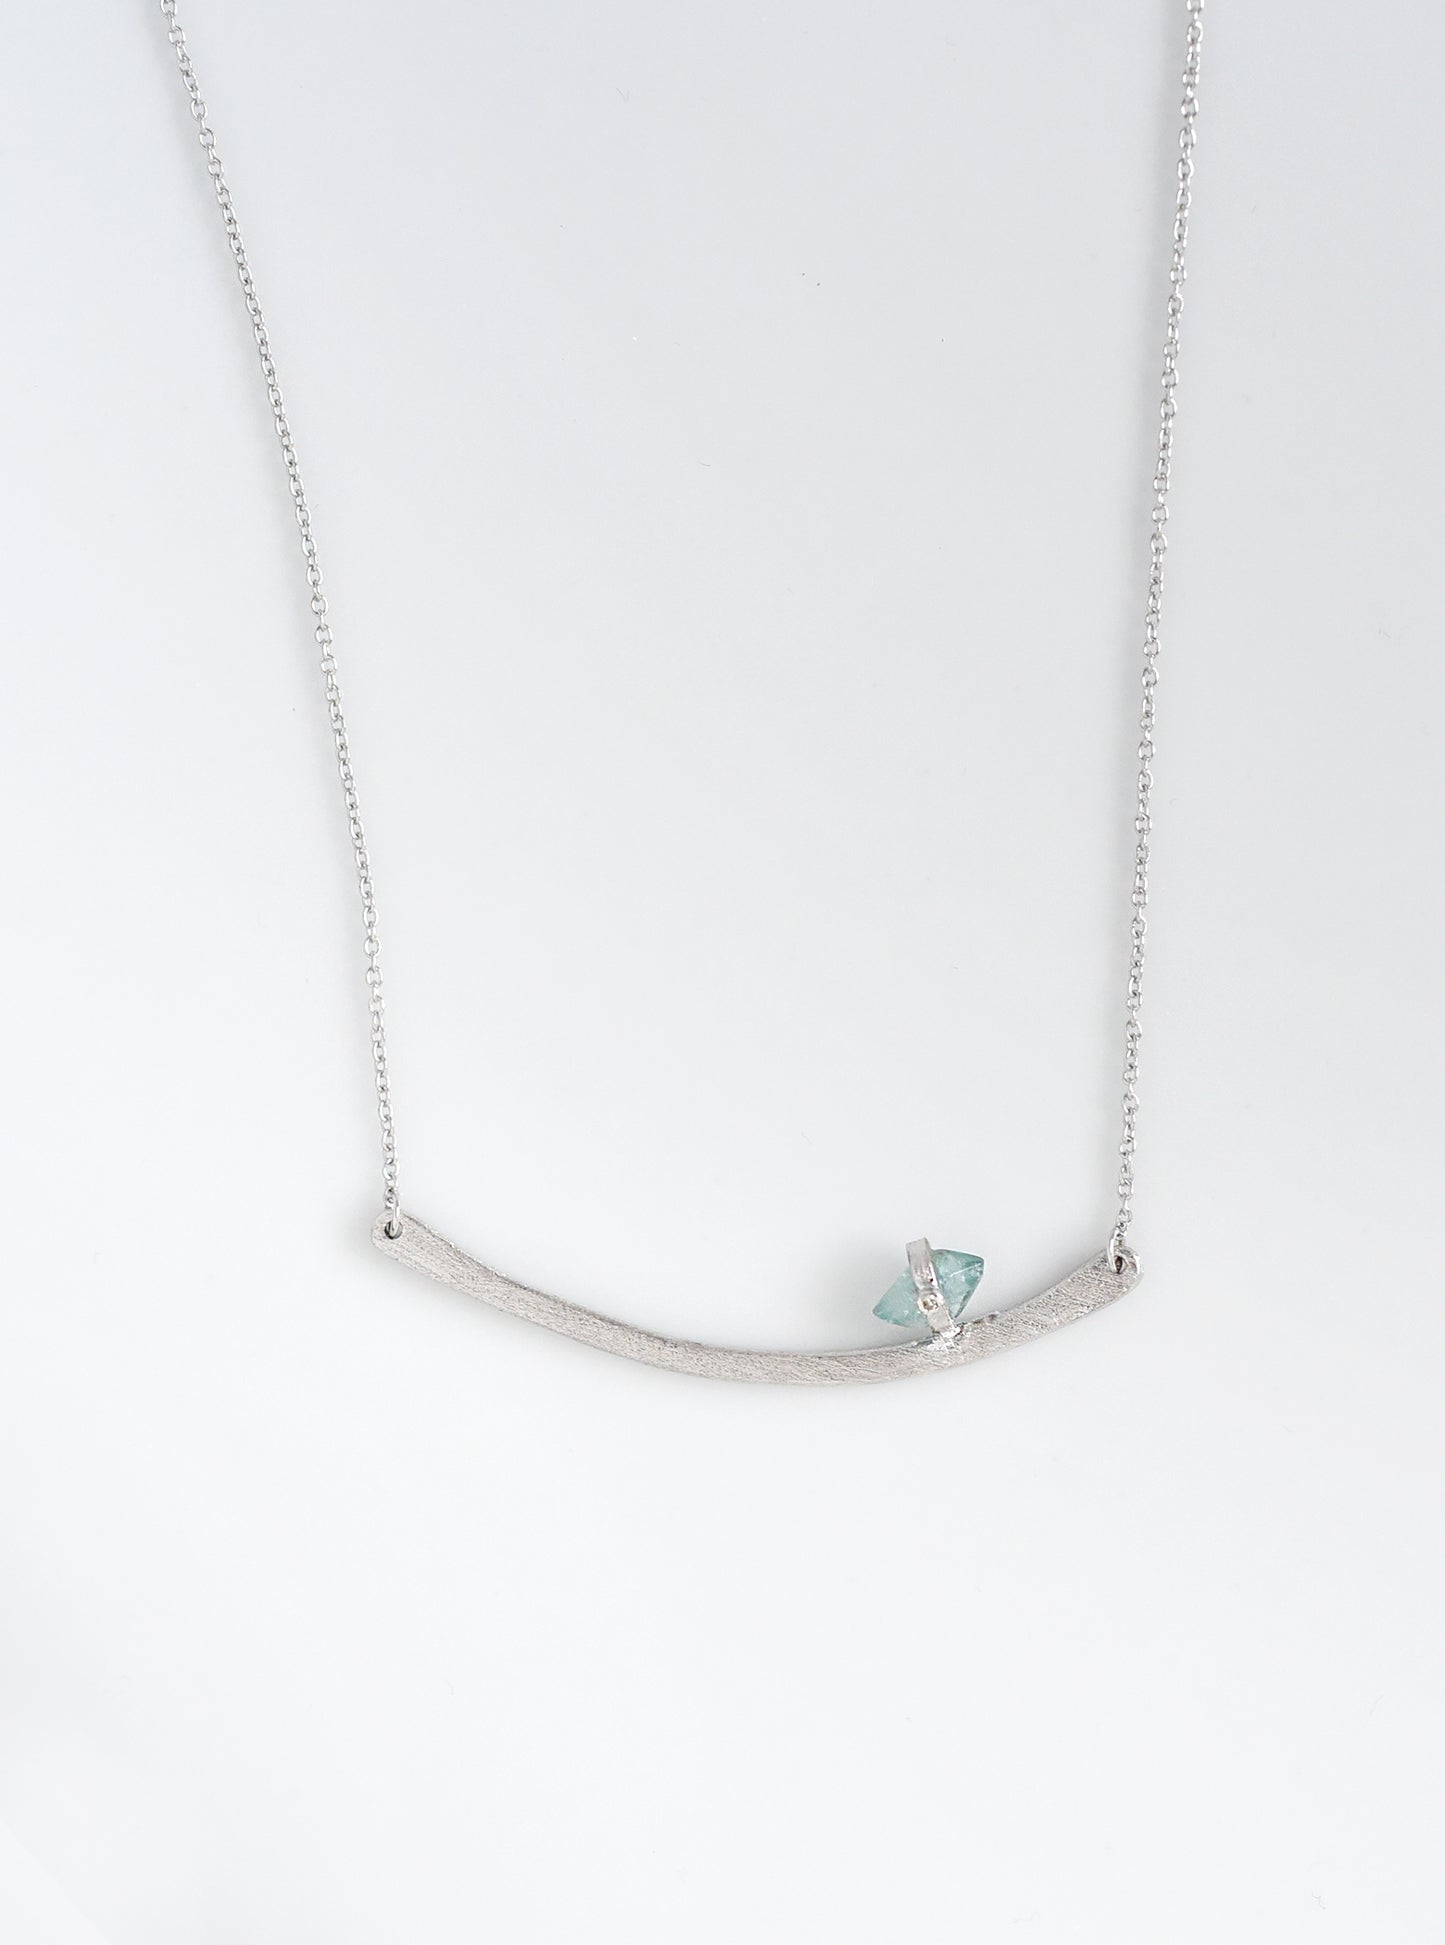 Handmade Curved Bar with Tourmaline Necklace